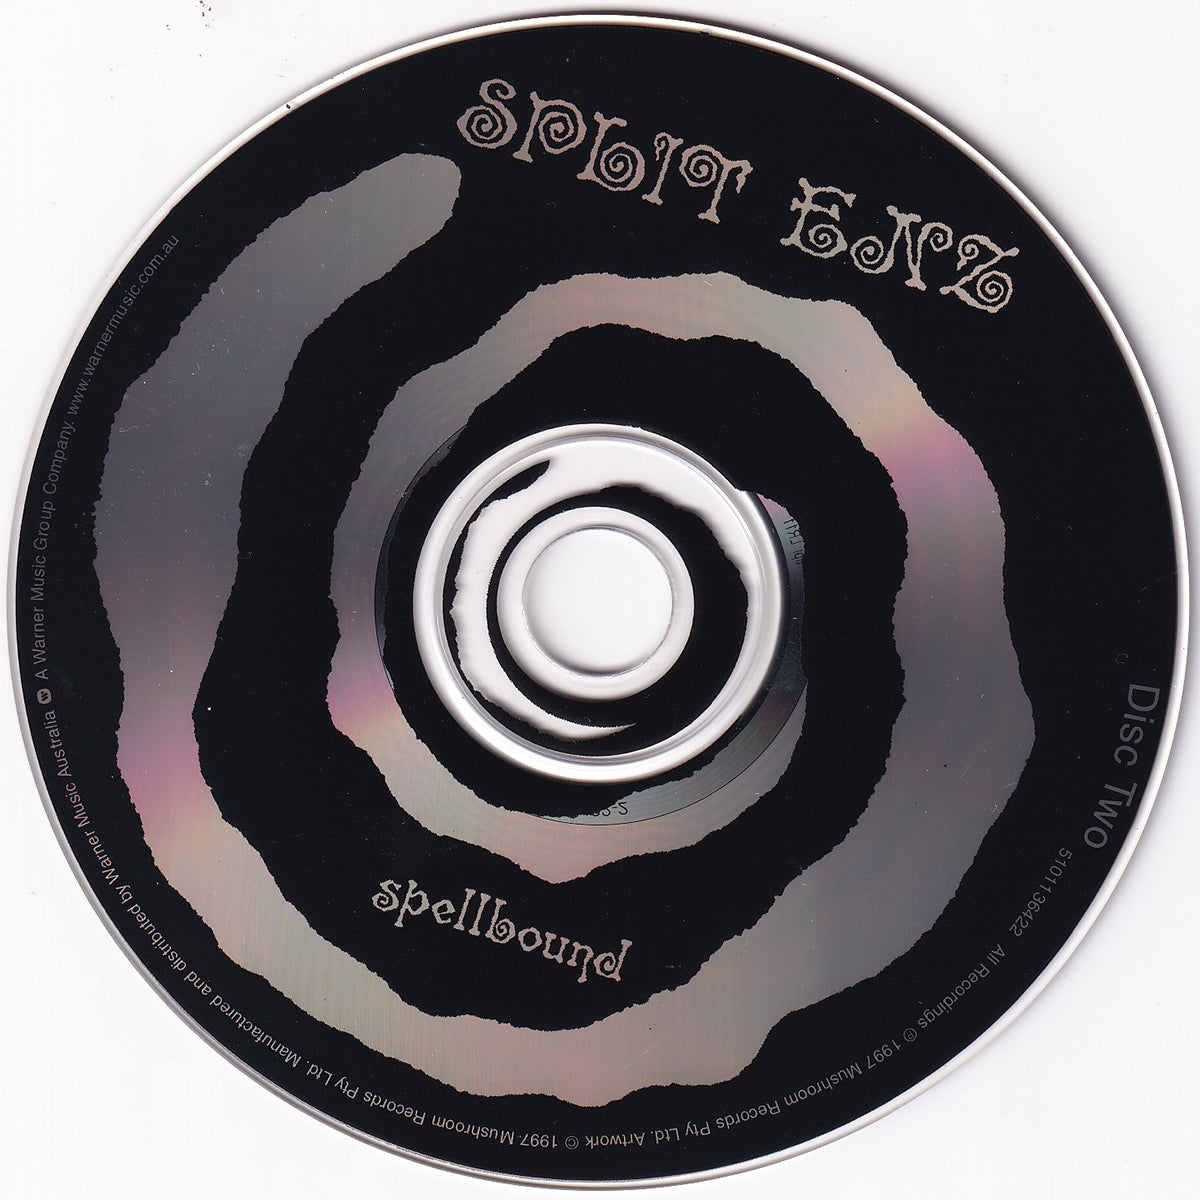 Spellbound: The Very Best Of Split Enz (2006 Tour Limited Edition)